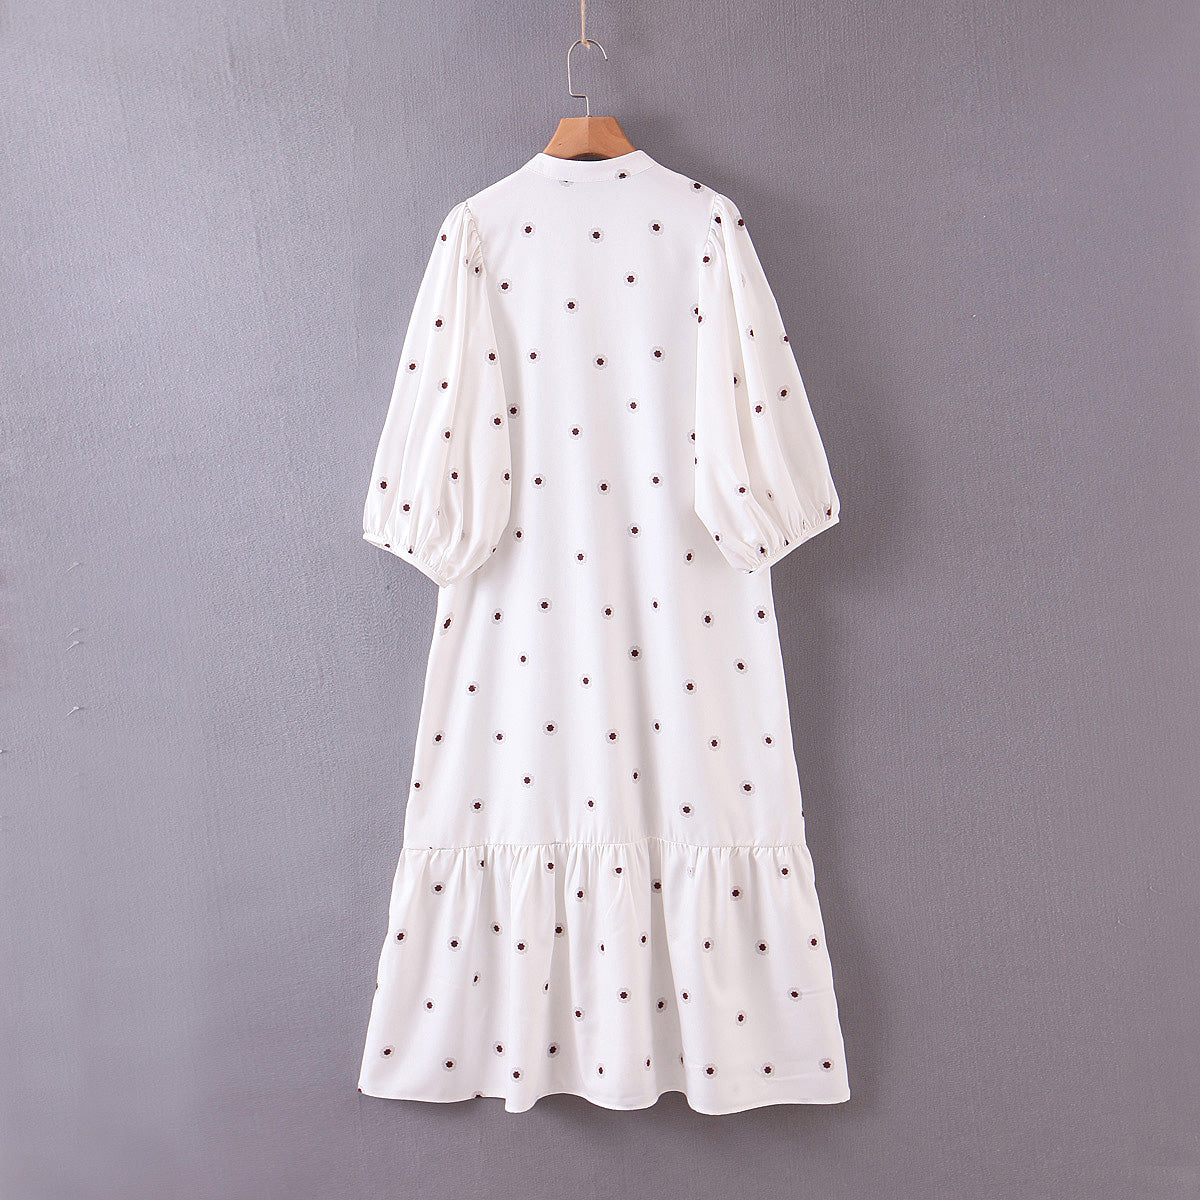 Evelyn Dotted Print Dress